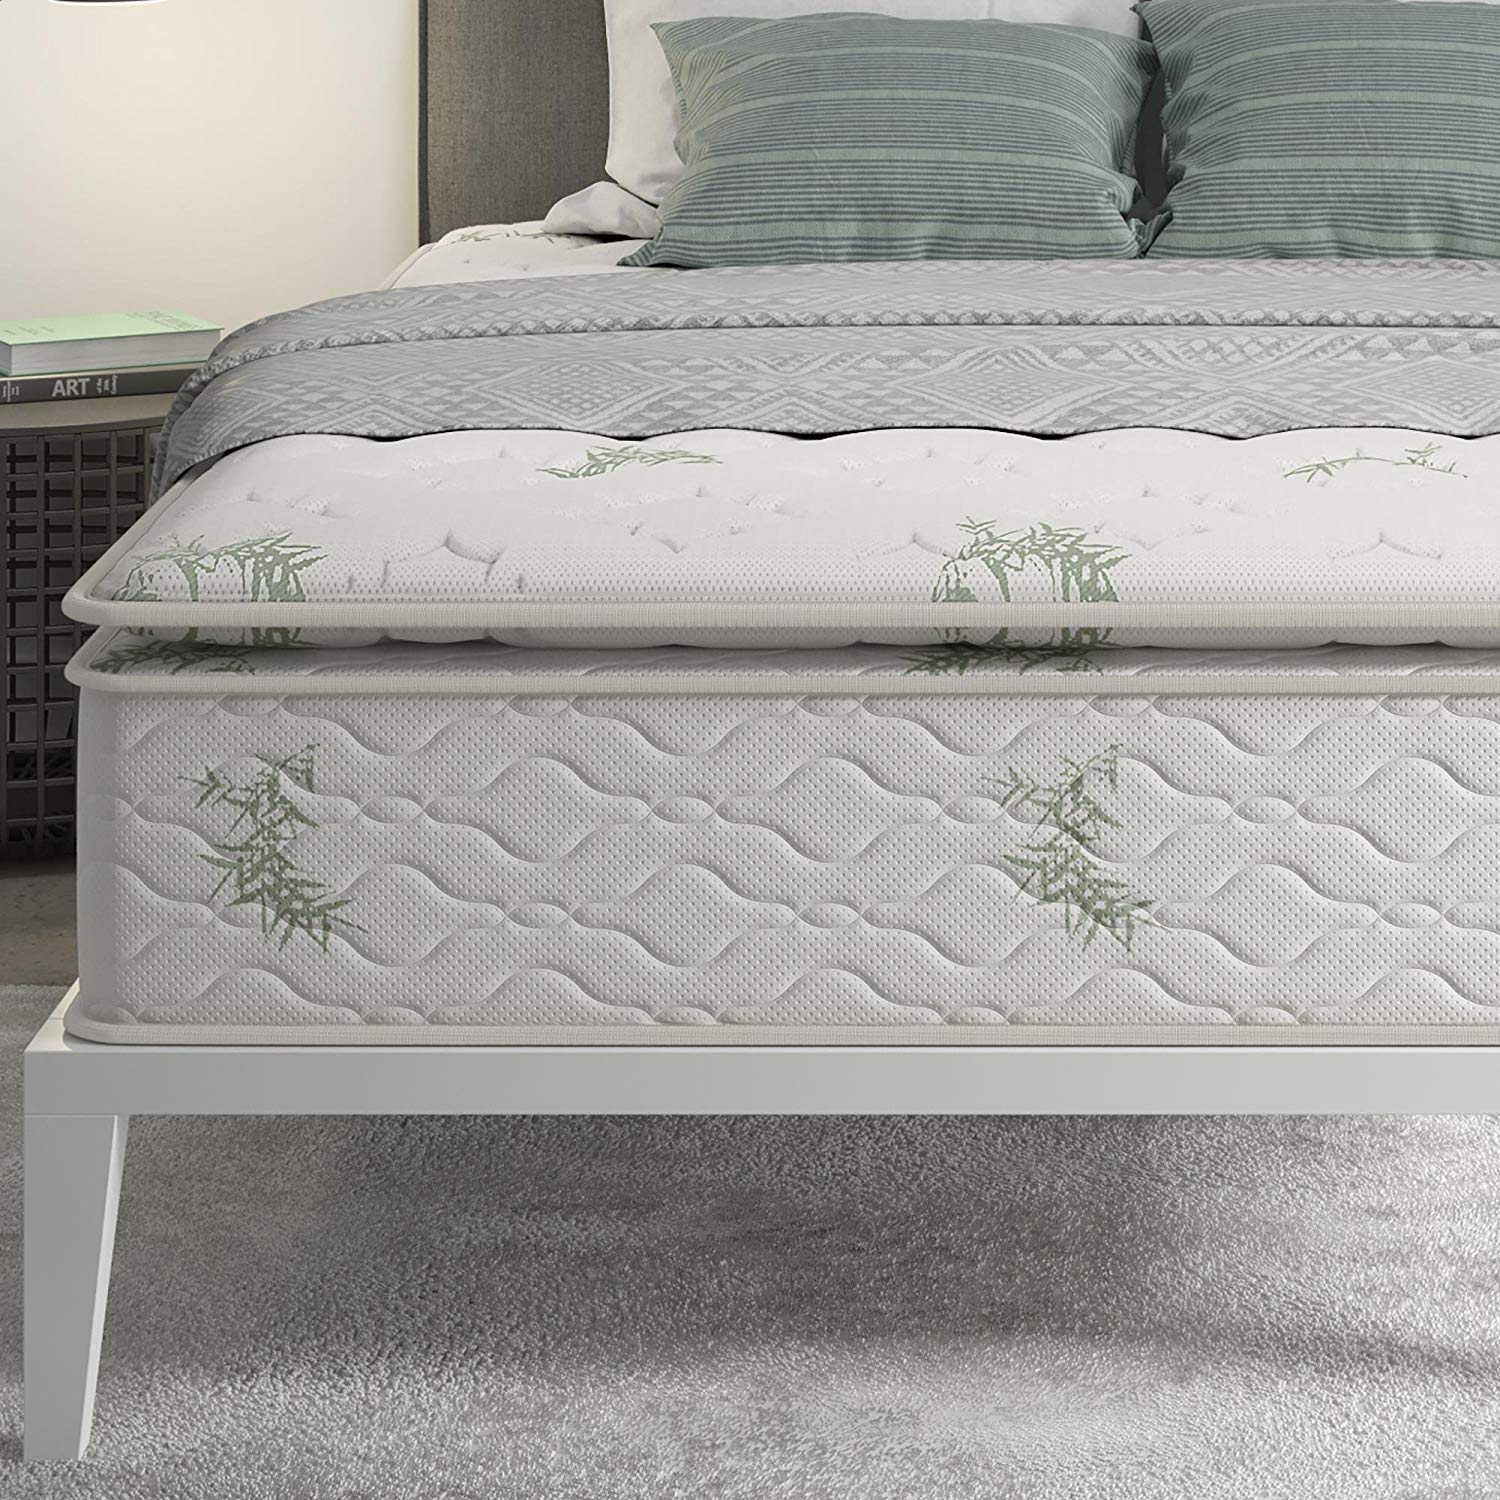 Signature Sleep 13 inch Pillow-Top Independently Encased Coil Mattress for Added Comfort, Full